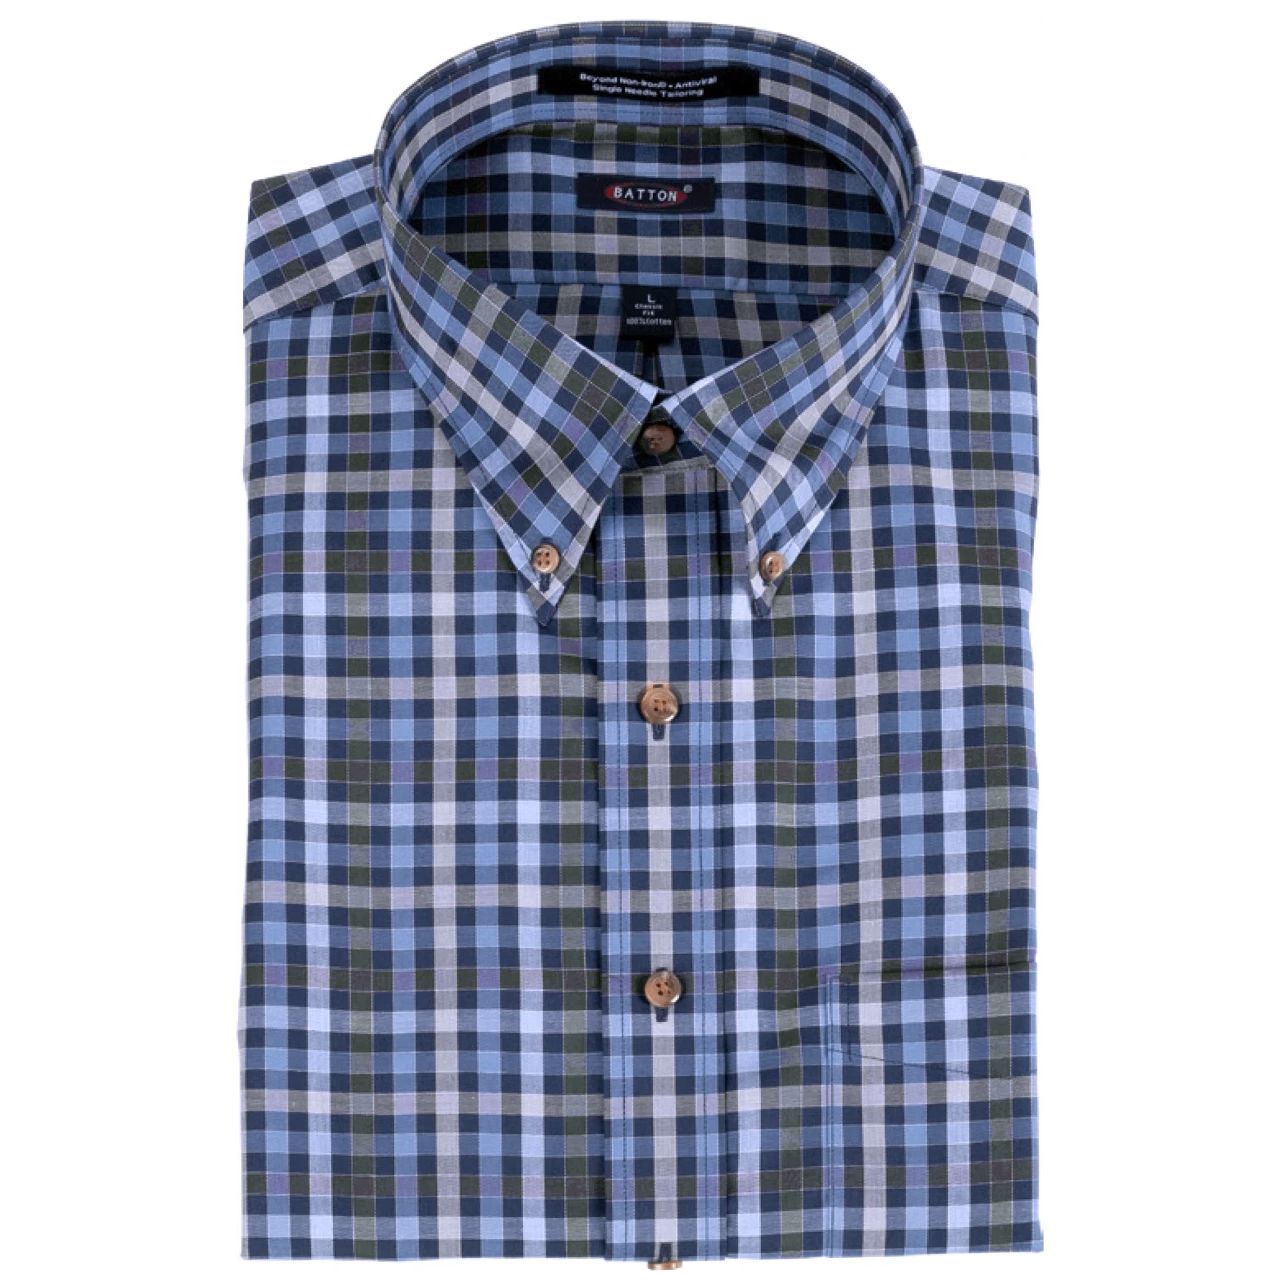 'Bobby' Navy, Sky, and Charcoal Plaid Long Sleeve Beyond Non-Iron® Cotton Twill Sport Shirt by Batton